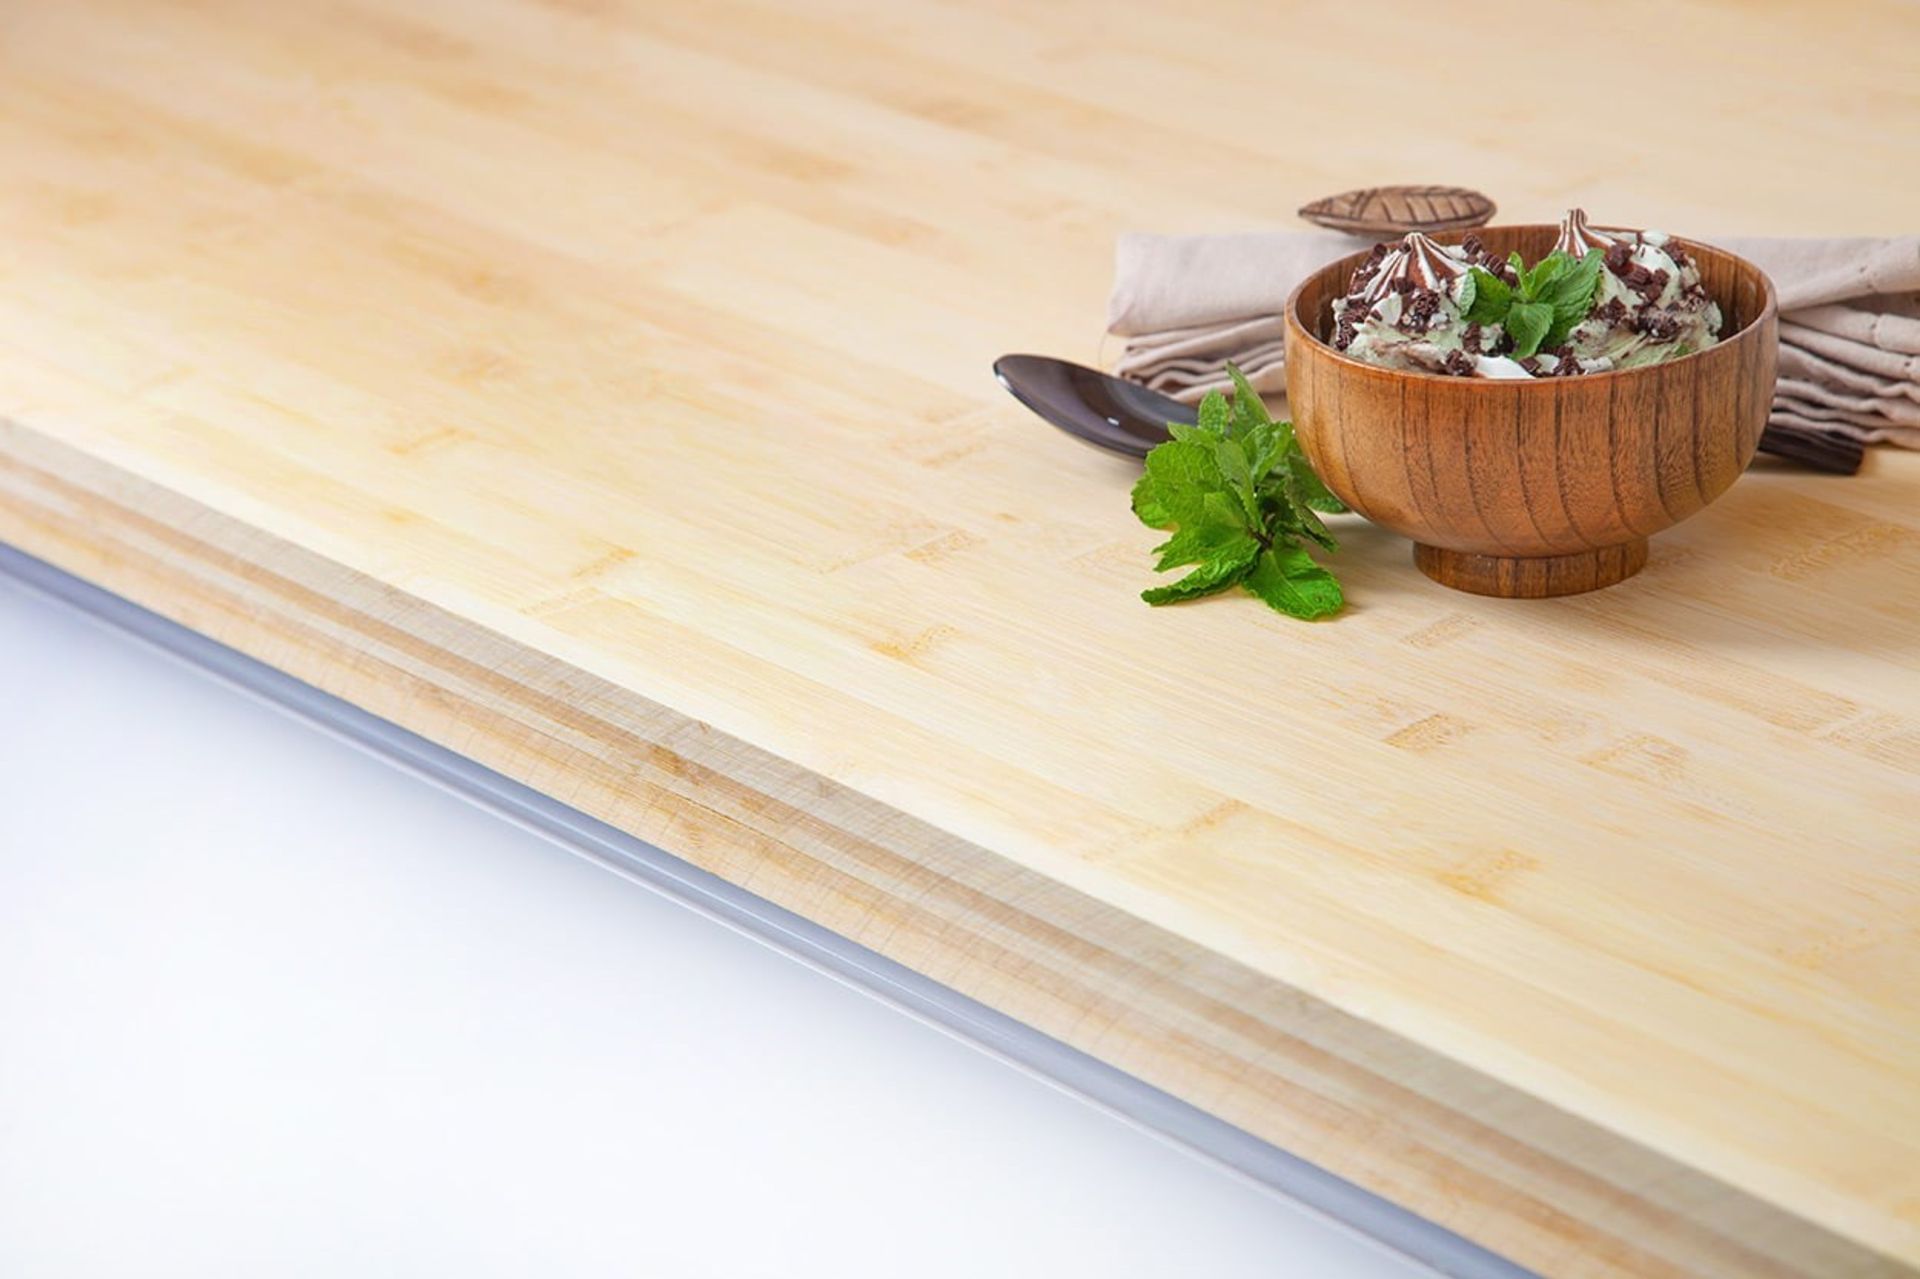 1 x Layered Solid Bamboo Wood Worktop - Size: 4000 x 650 x 40mm - Ideal For Kitchens, Countertops, - Image 3 of 4